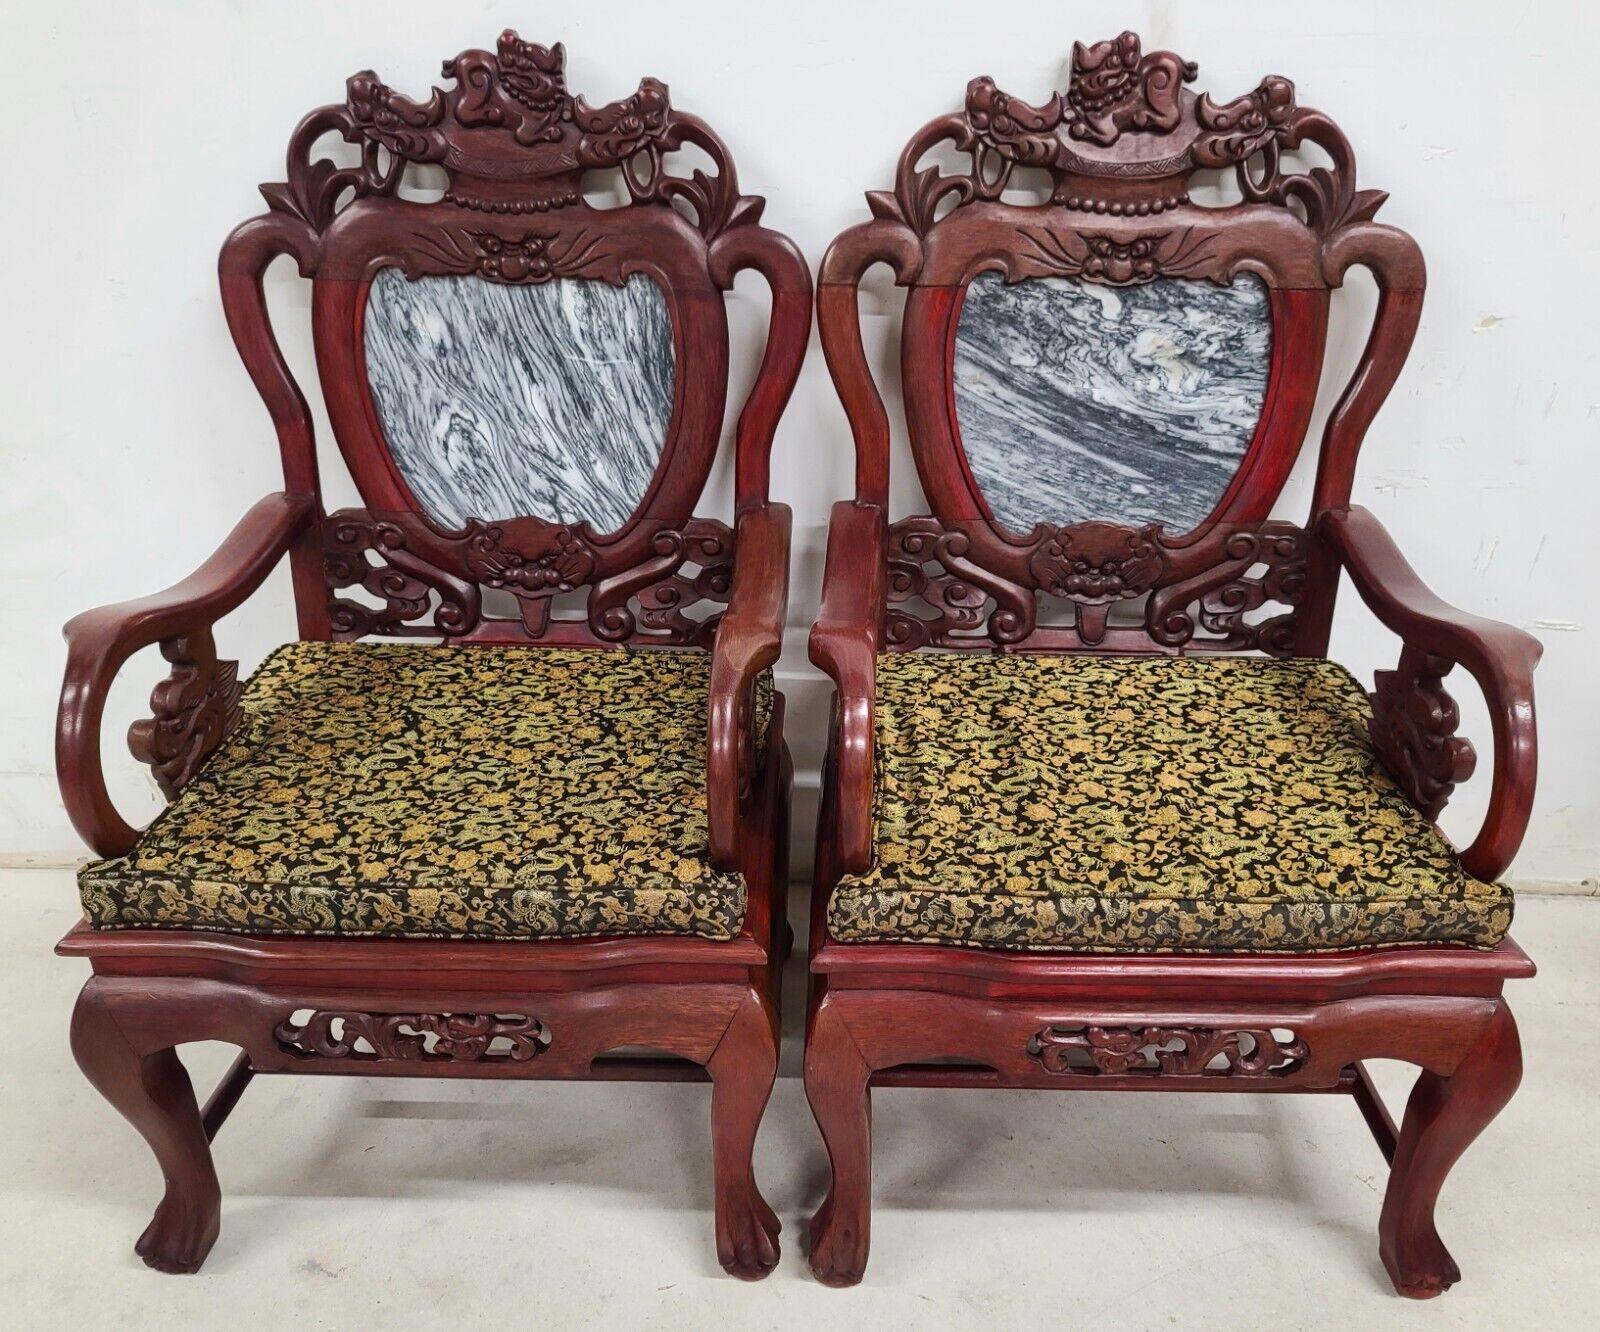 For FULL item description click on CONTINUE READING at the bottom of this page.

Offering One Of Our Recent Palm Beach Estate Fine Furniture Acquisitions Of A
Pair of Mid Century Chinese Asian Rosewood & Marble Armchairs 

Featuring carved Foo Dogs